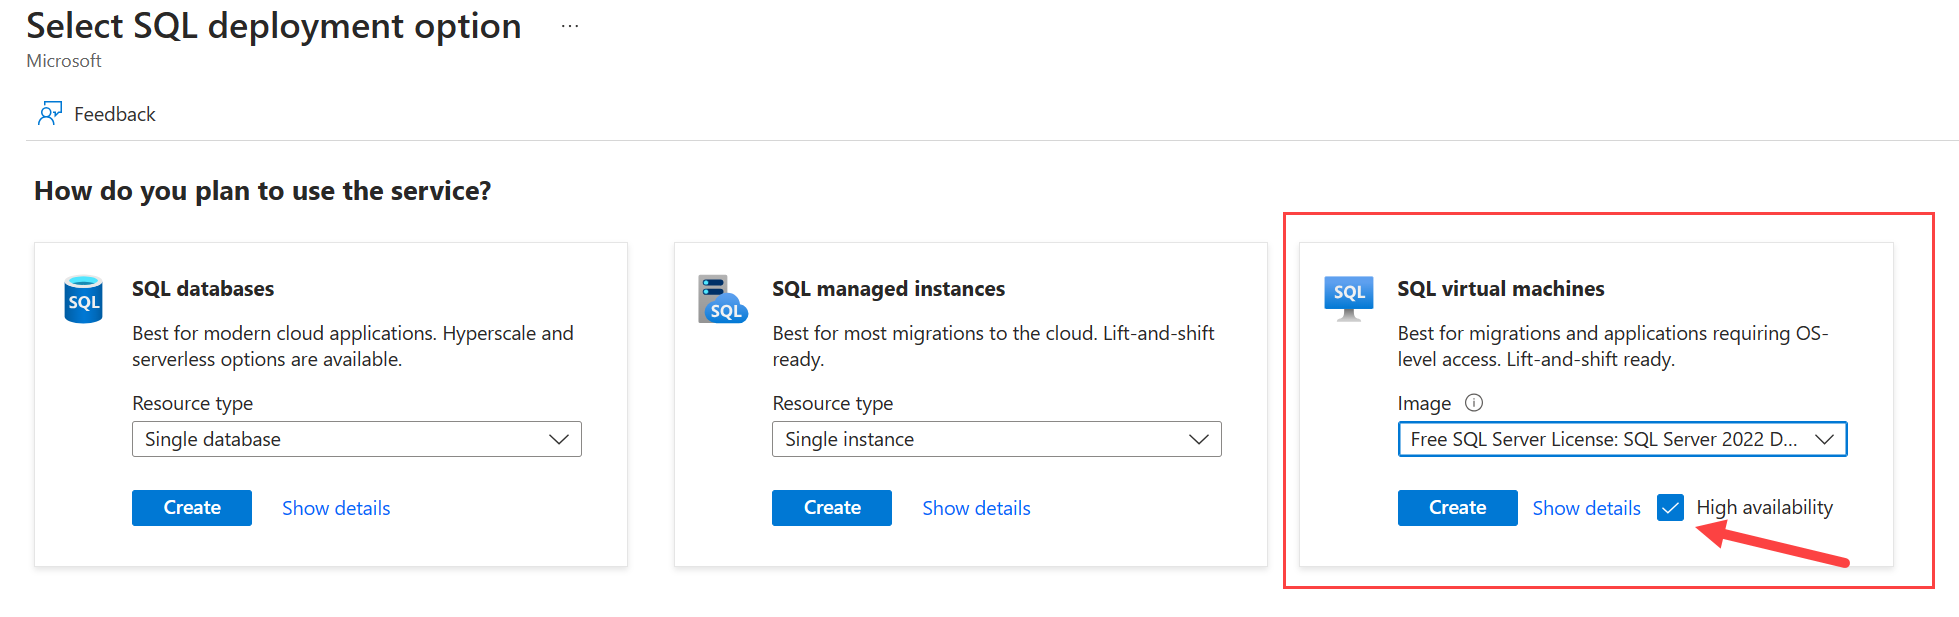 Screenshot of the Azure portal, showing the Select SQL deployment option page, with high availability checked. 